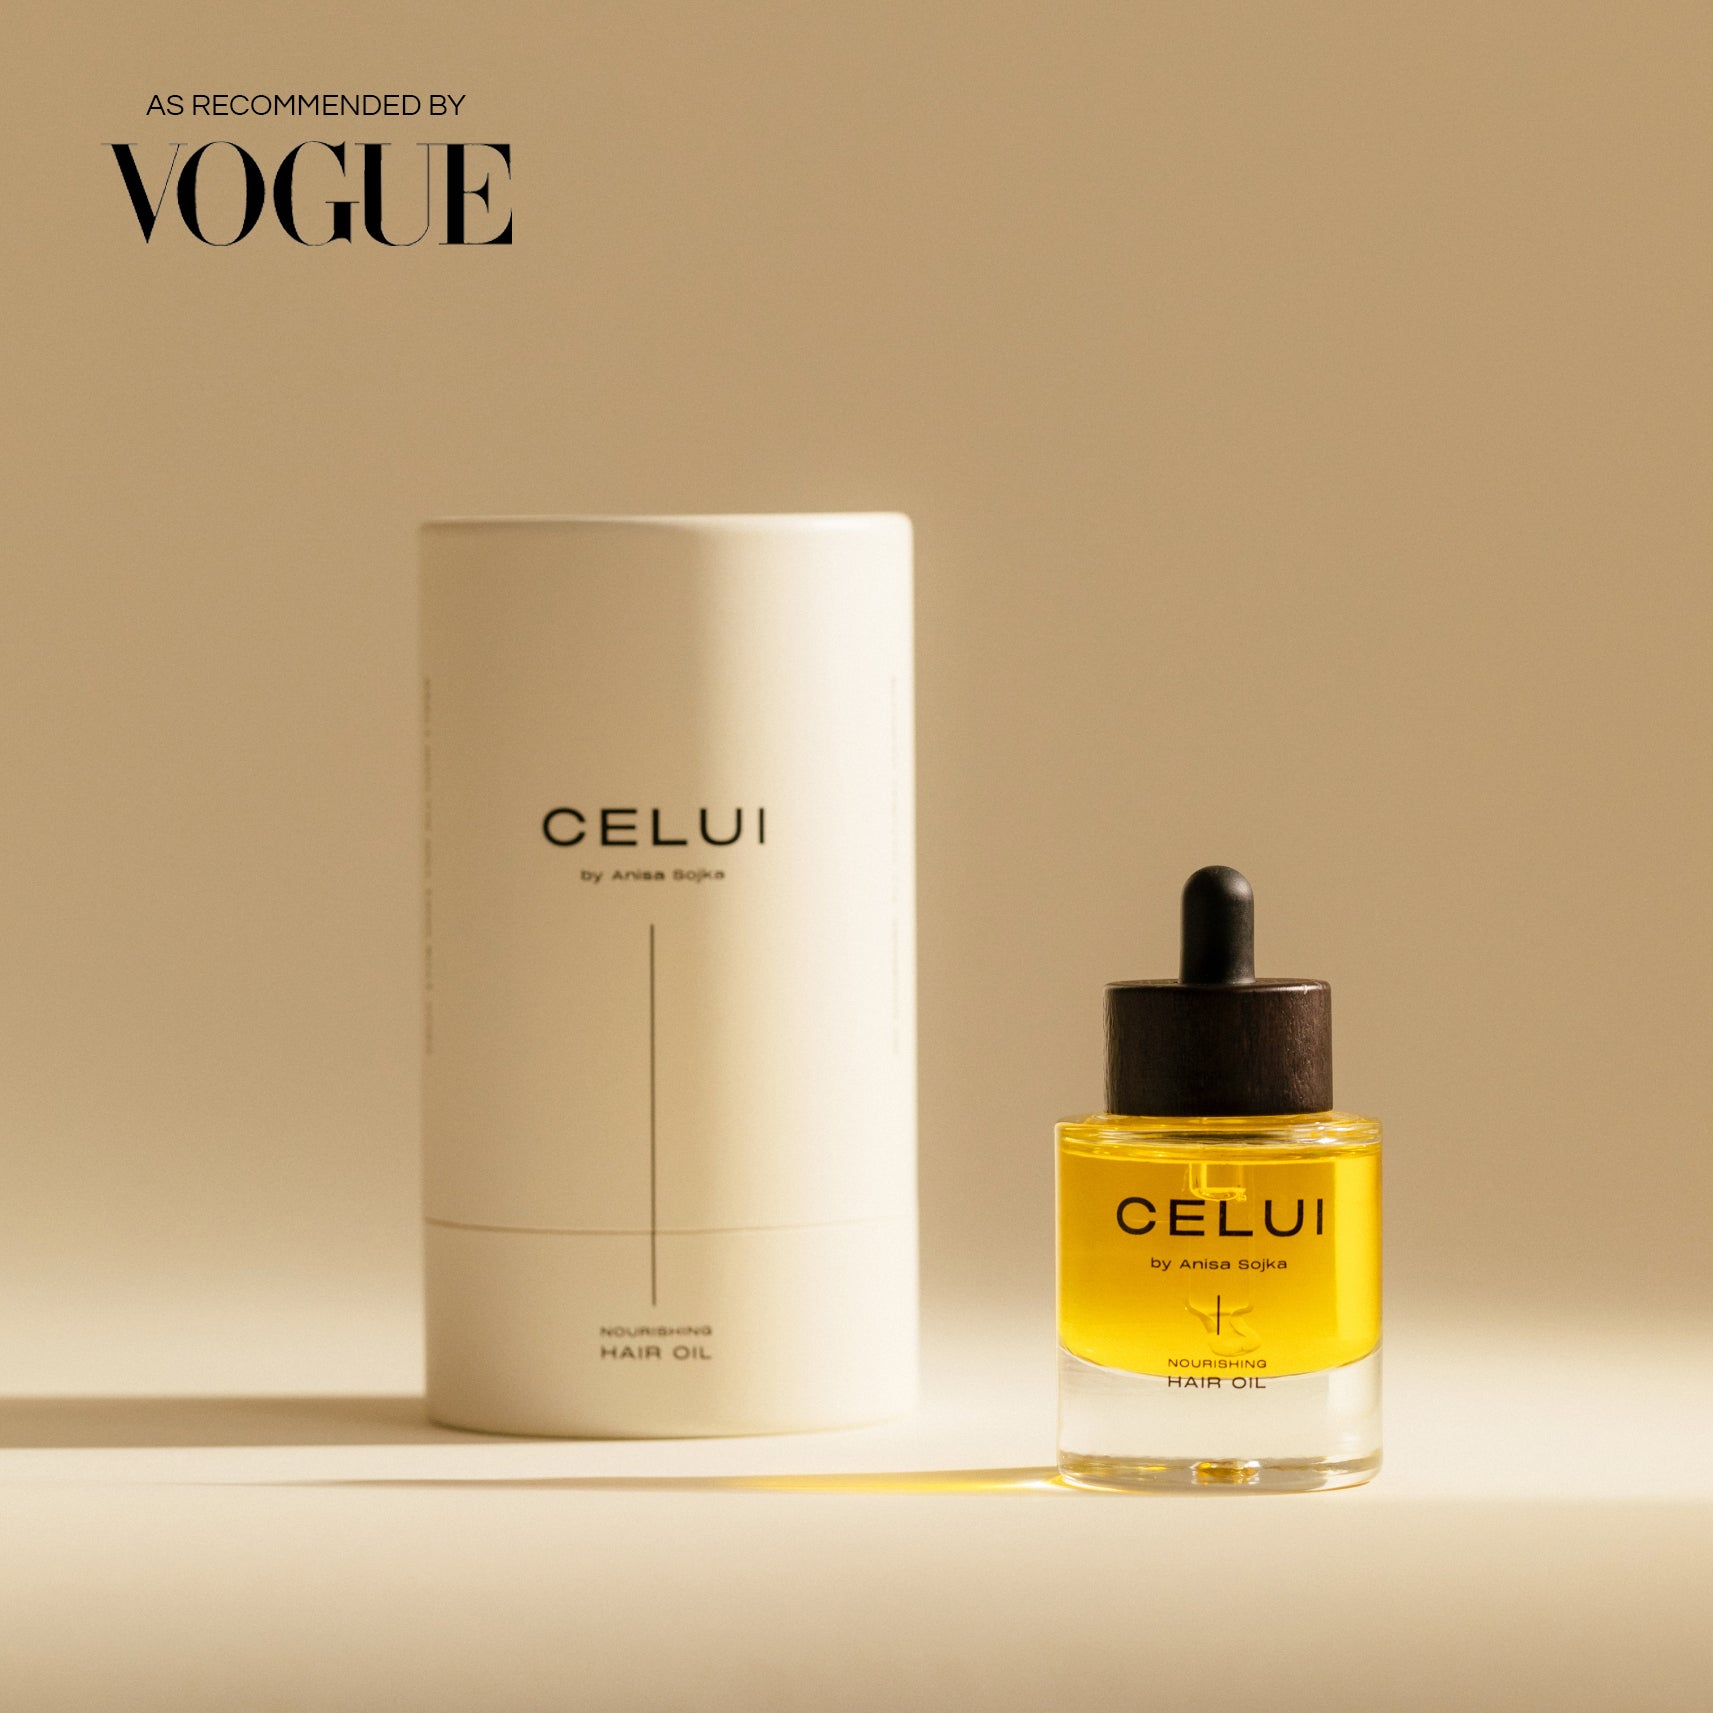 CELUI by Anisa Sojka Nourishing Hair Oil recommended by Vogue